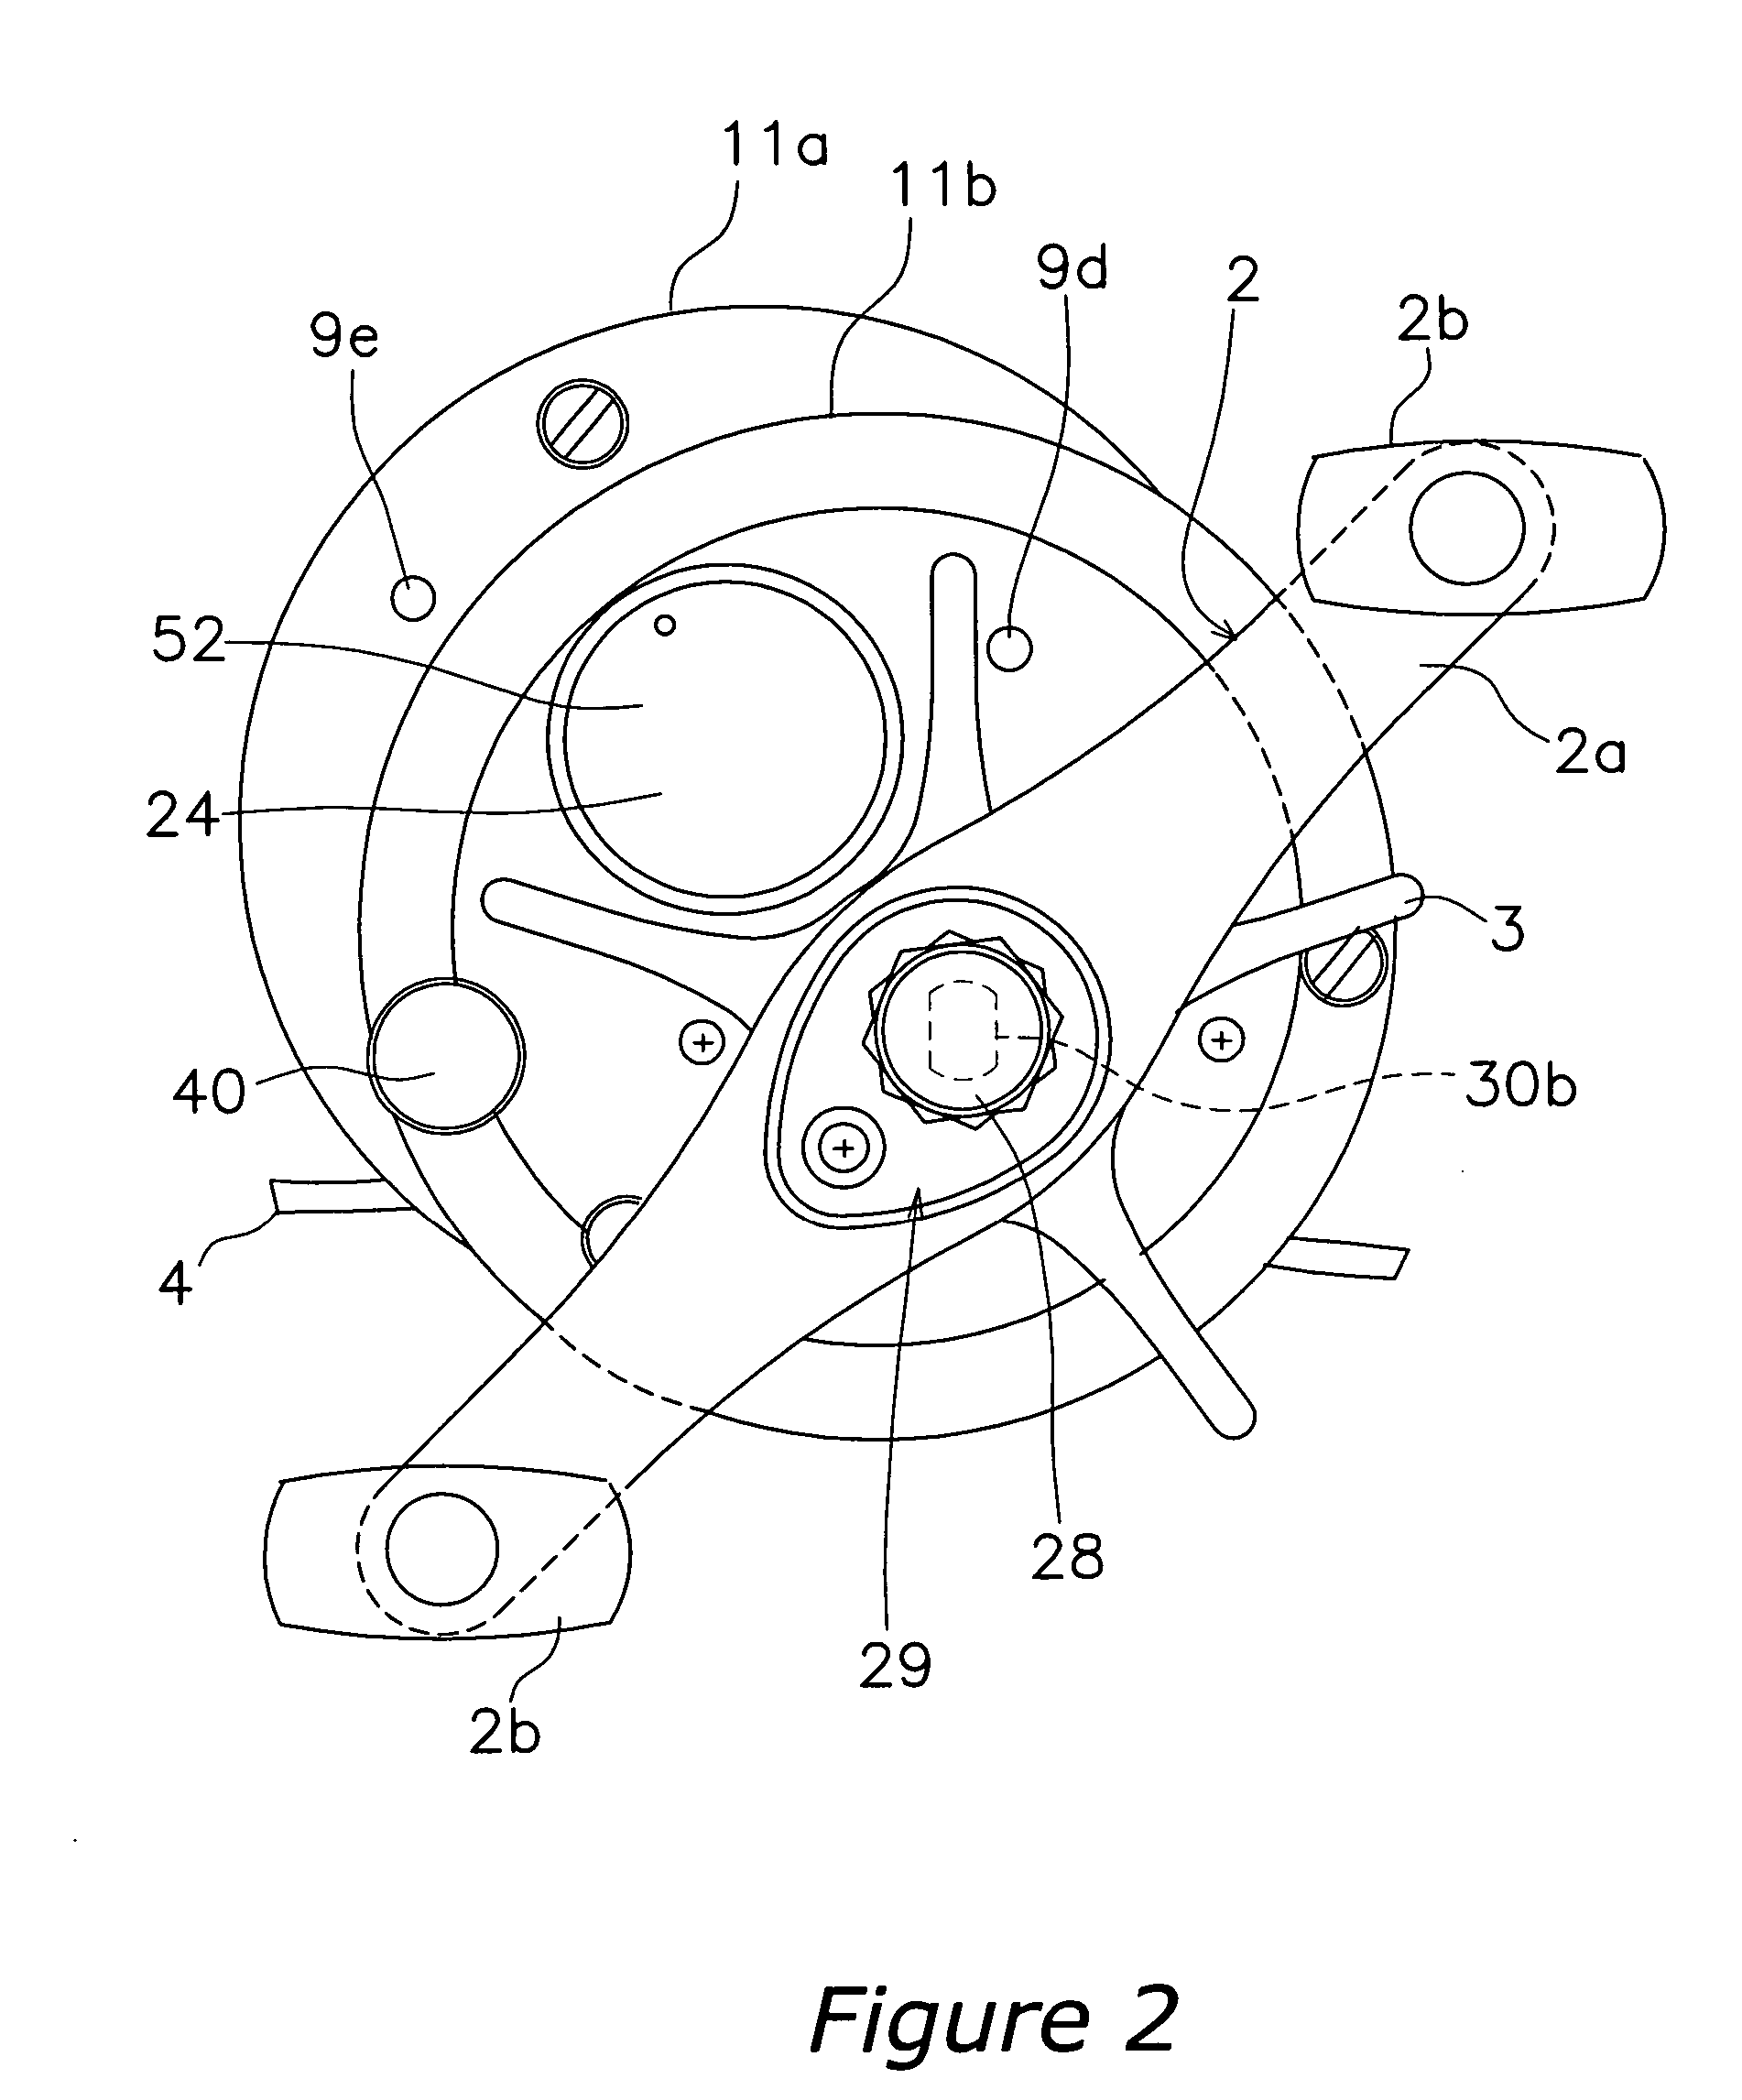 Spool assembly for a dual bearing reel